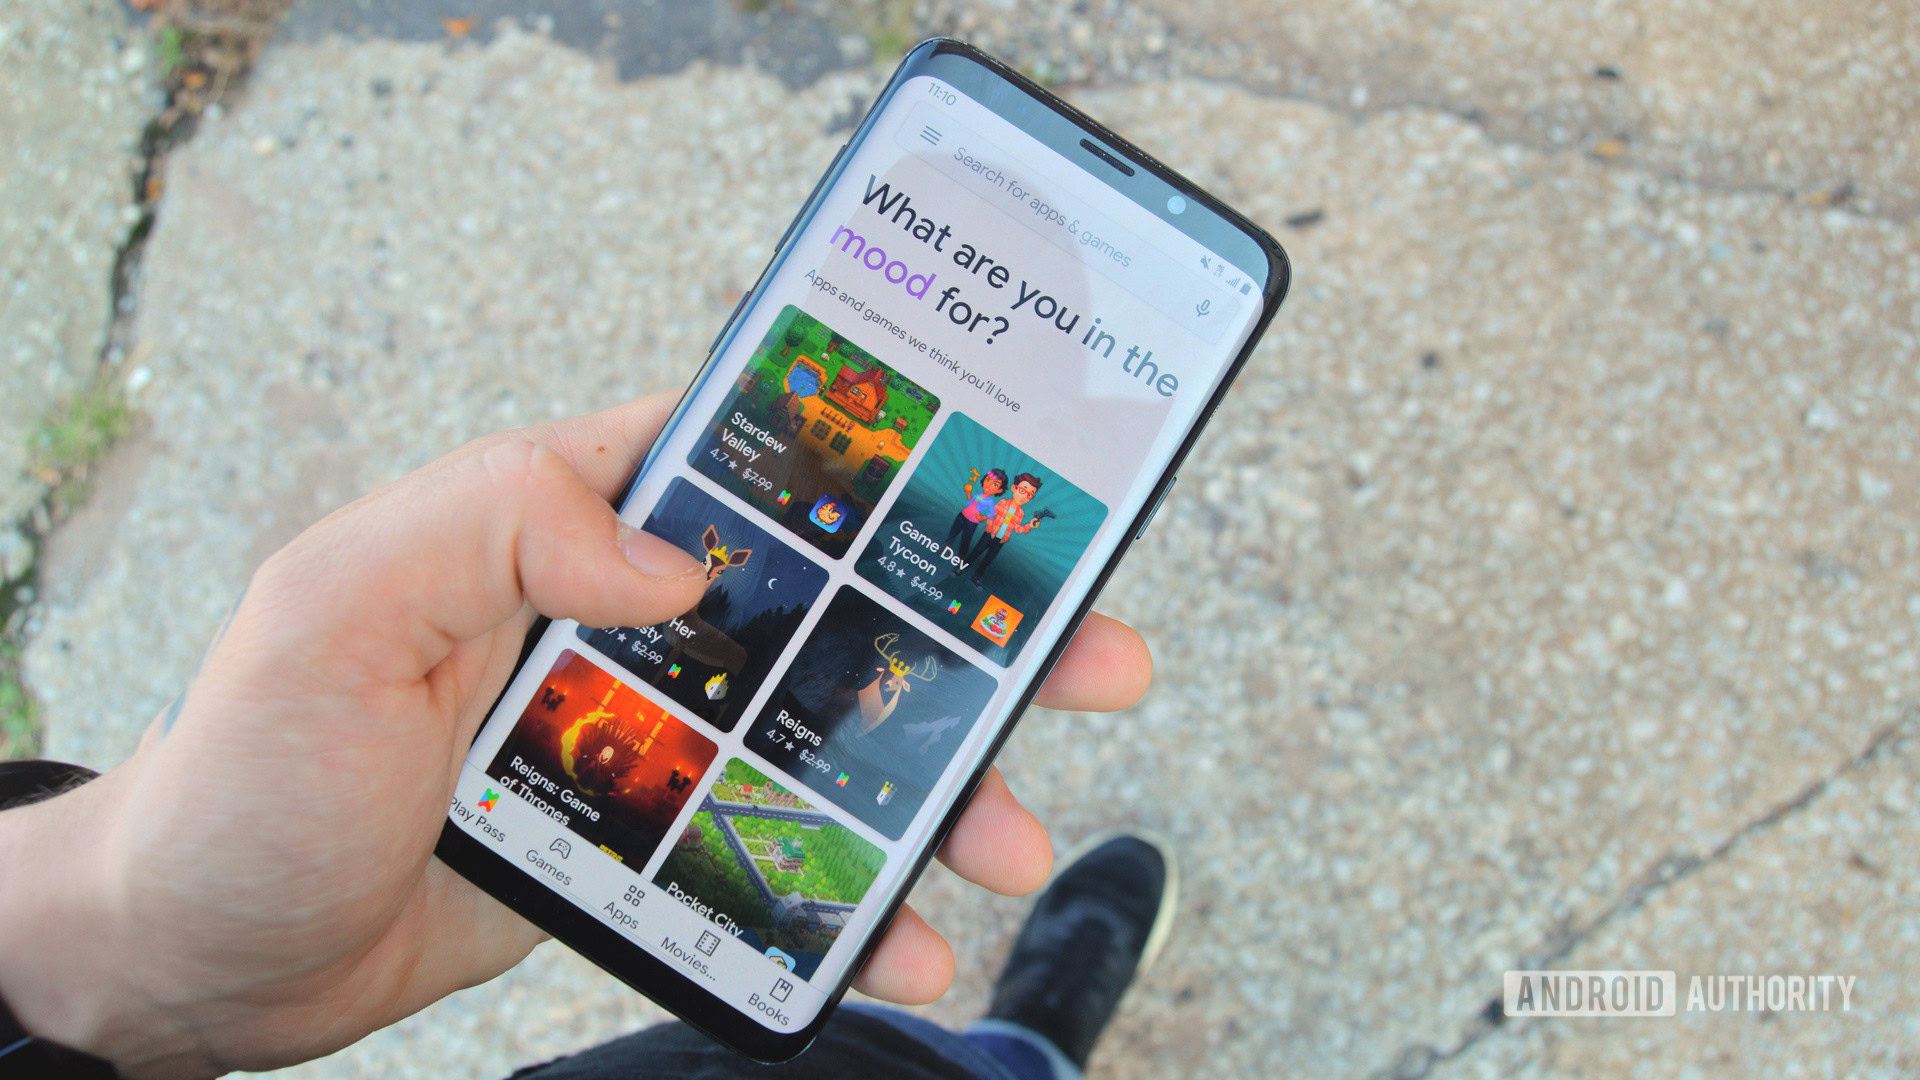 What is Google Play Pass? Pricing, Features, and Best Games and Apps